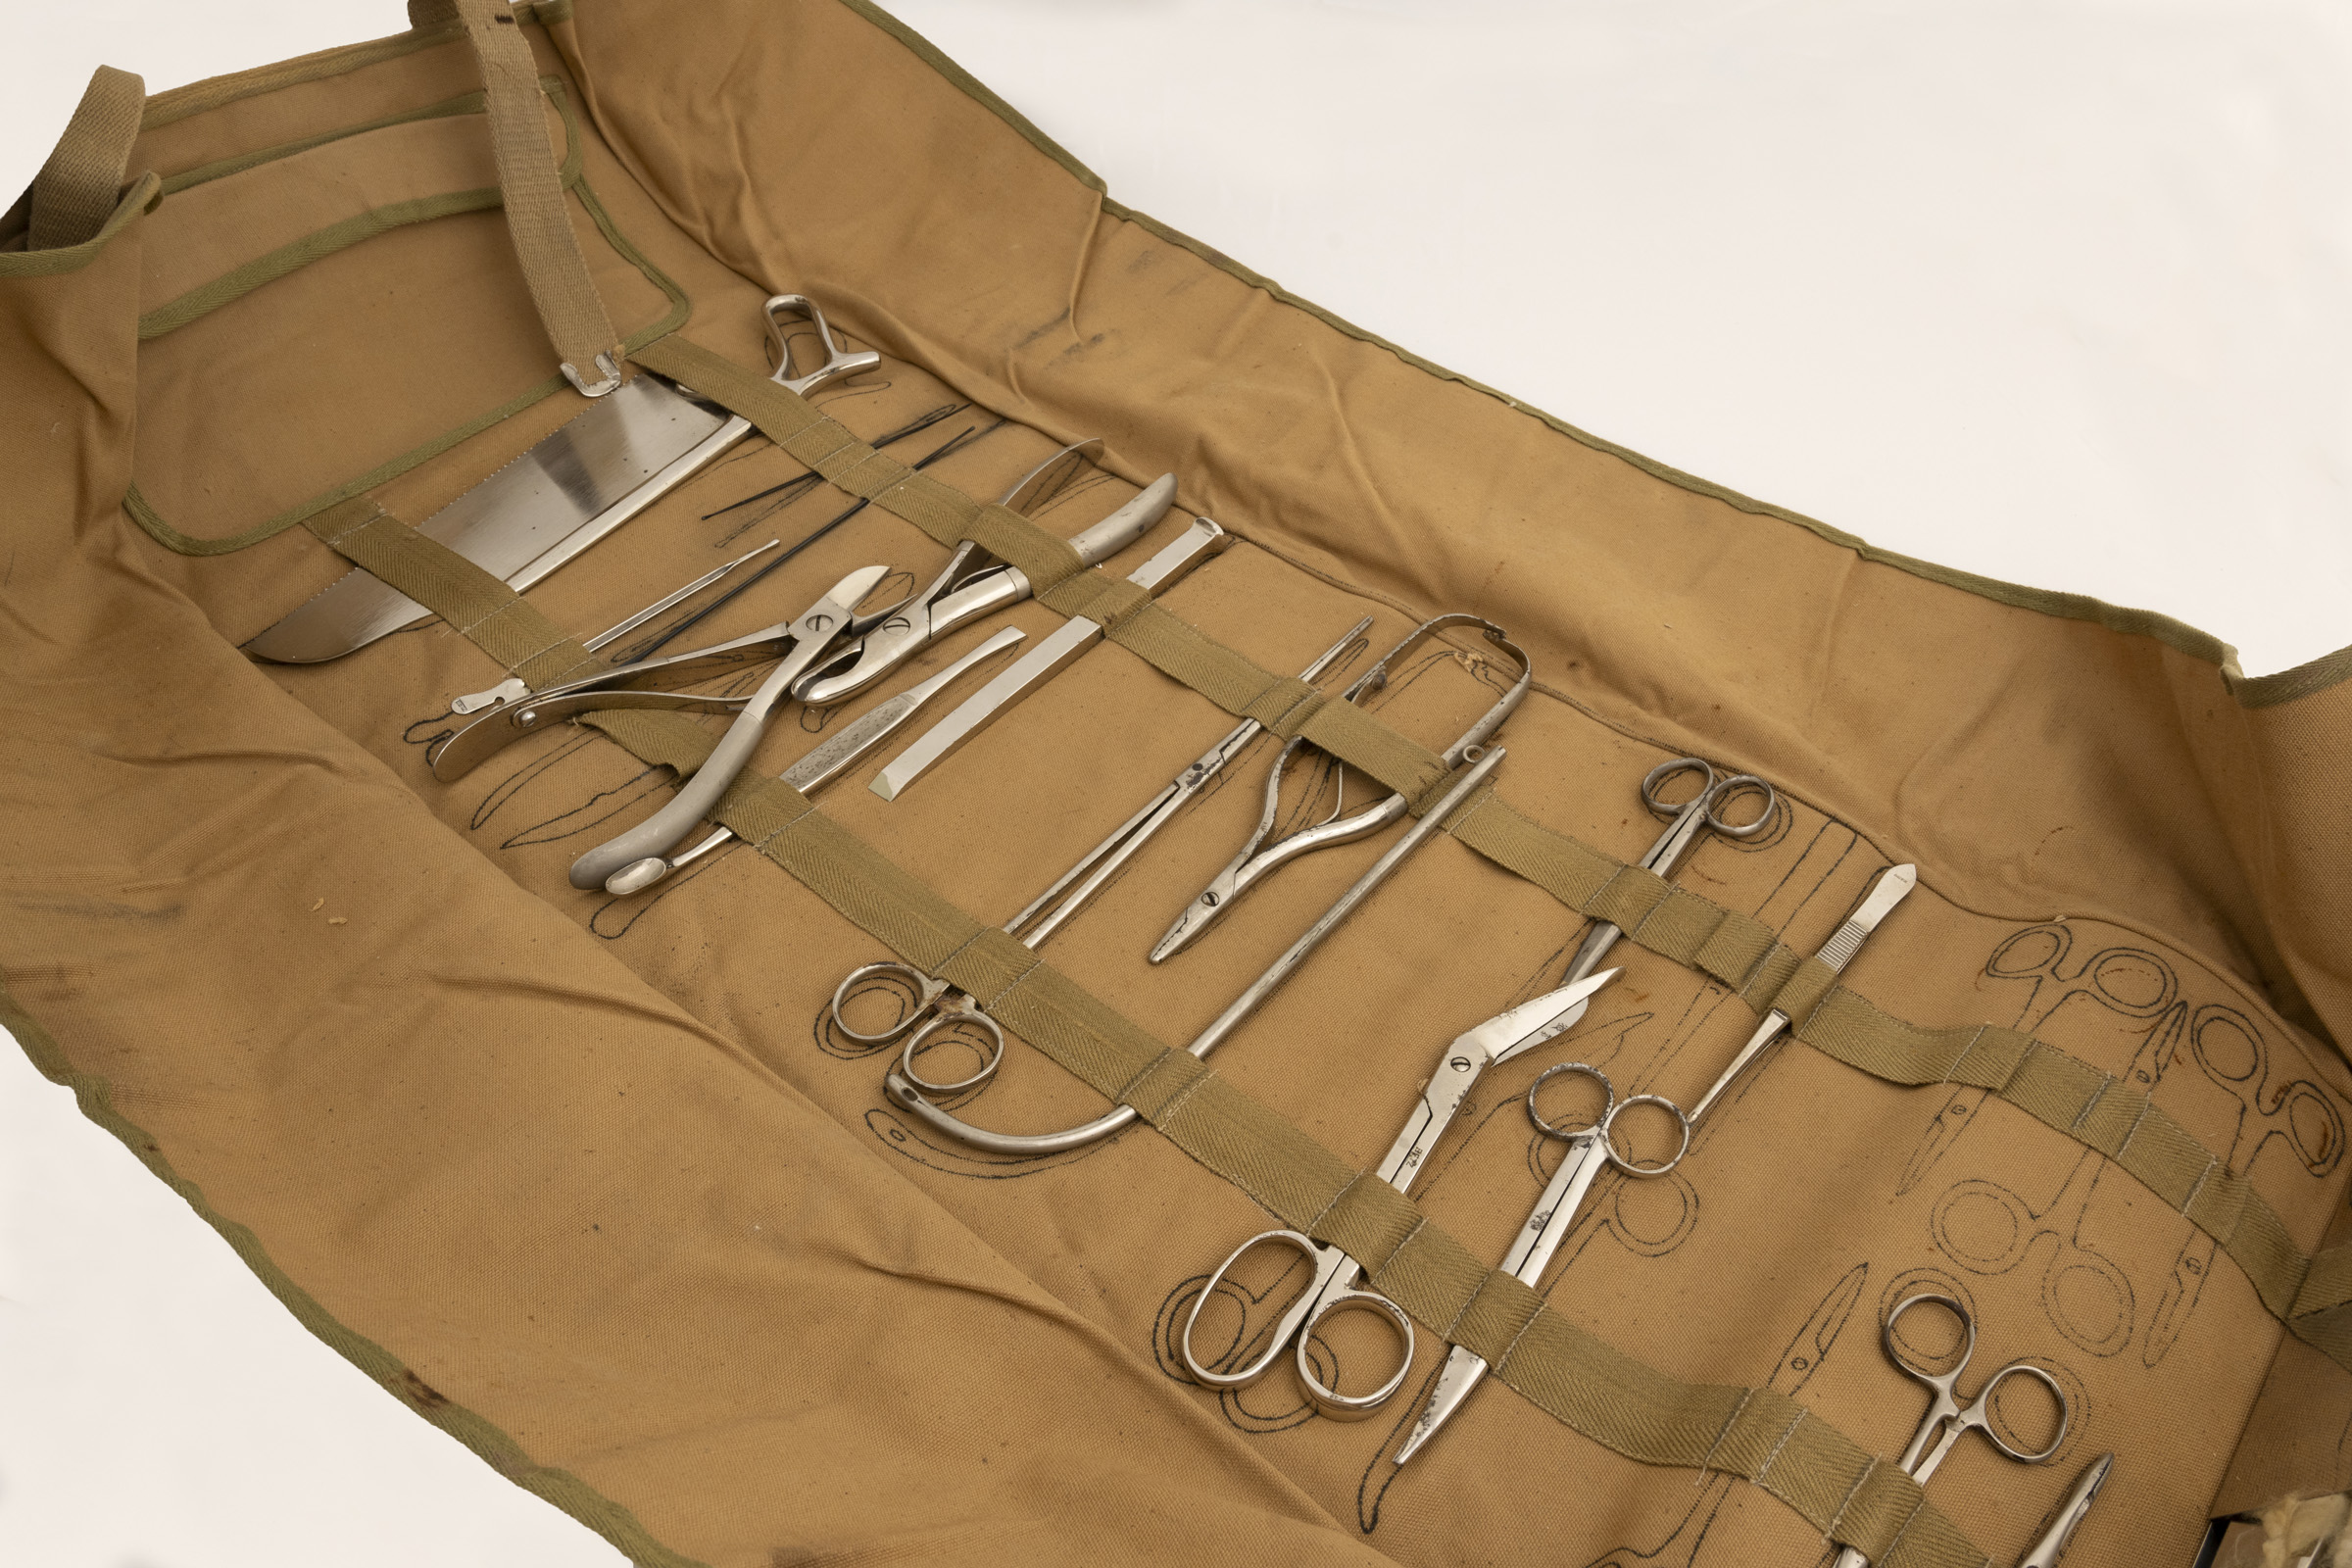 Beige canvas roll, spread out, with surgical instruments.